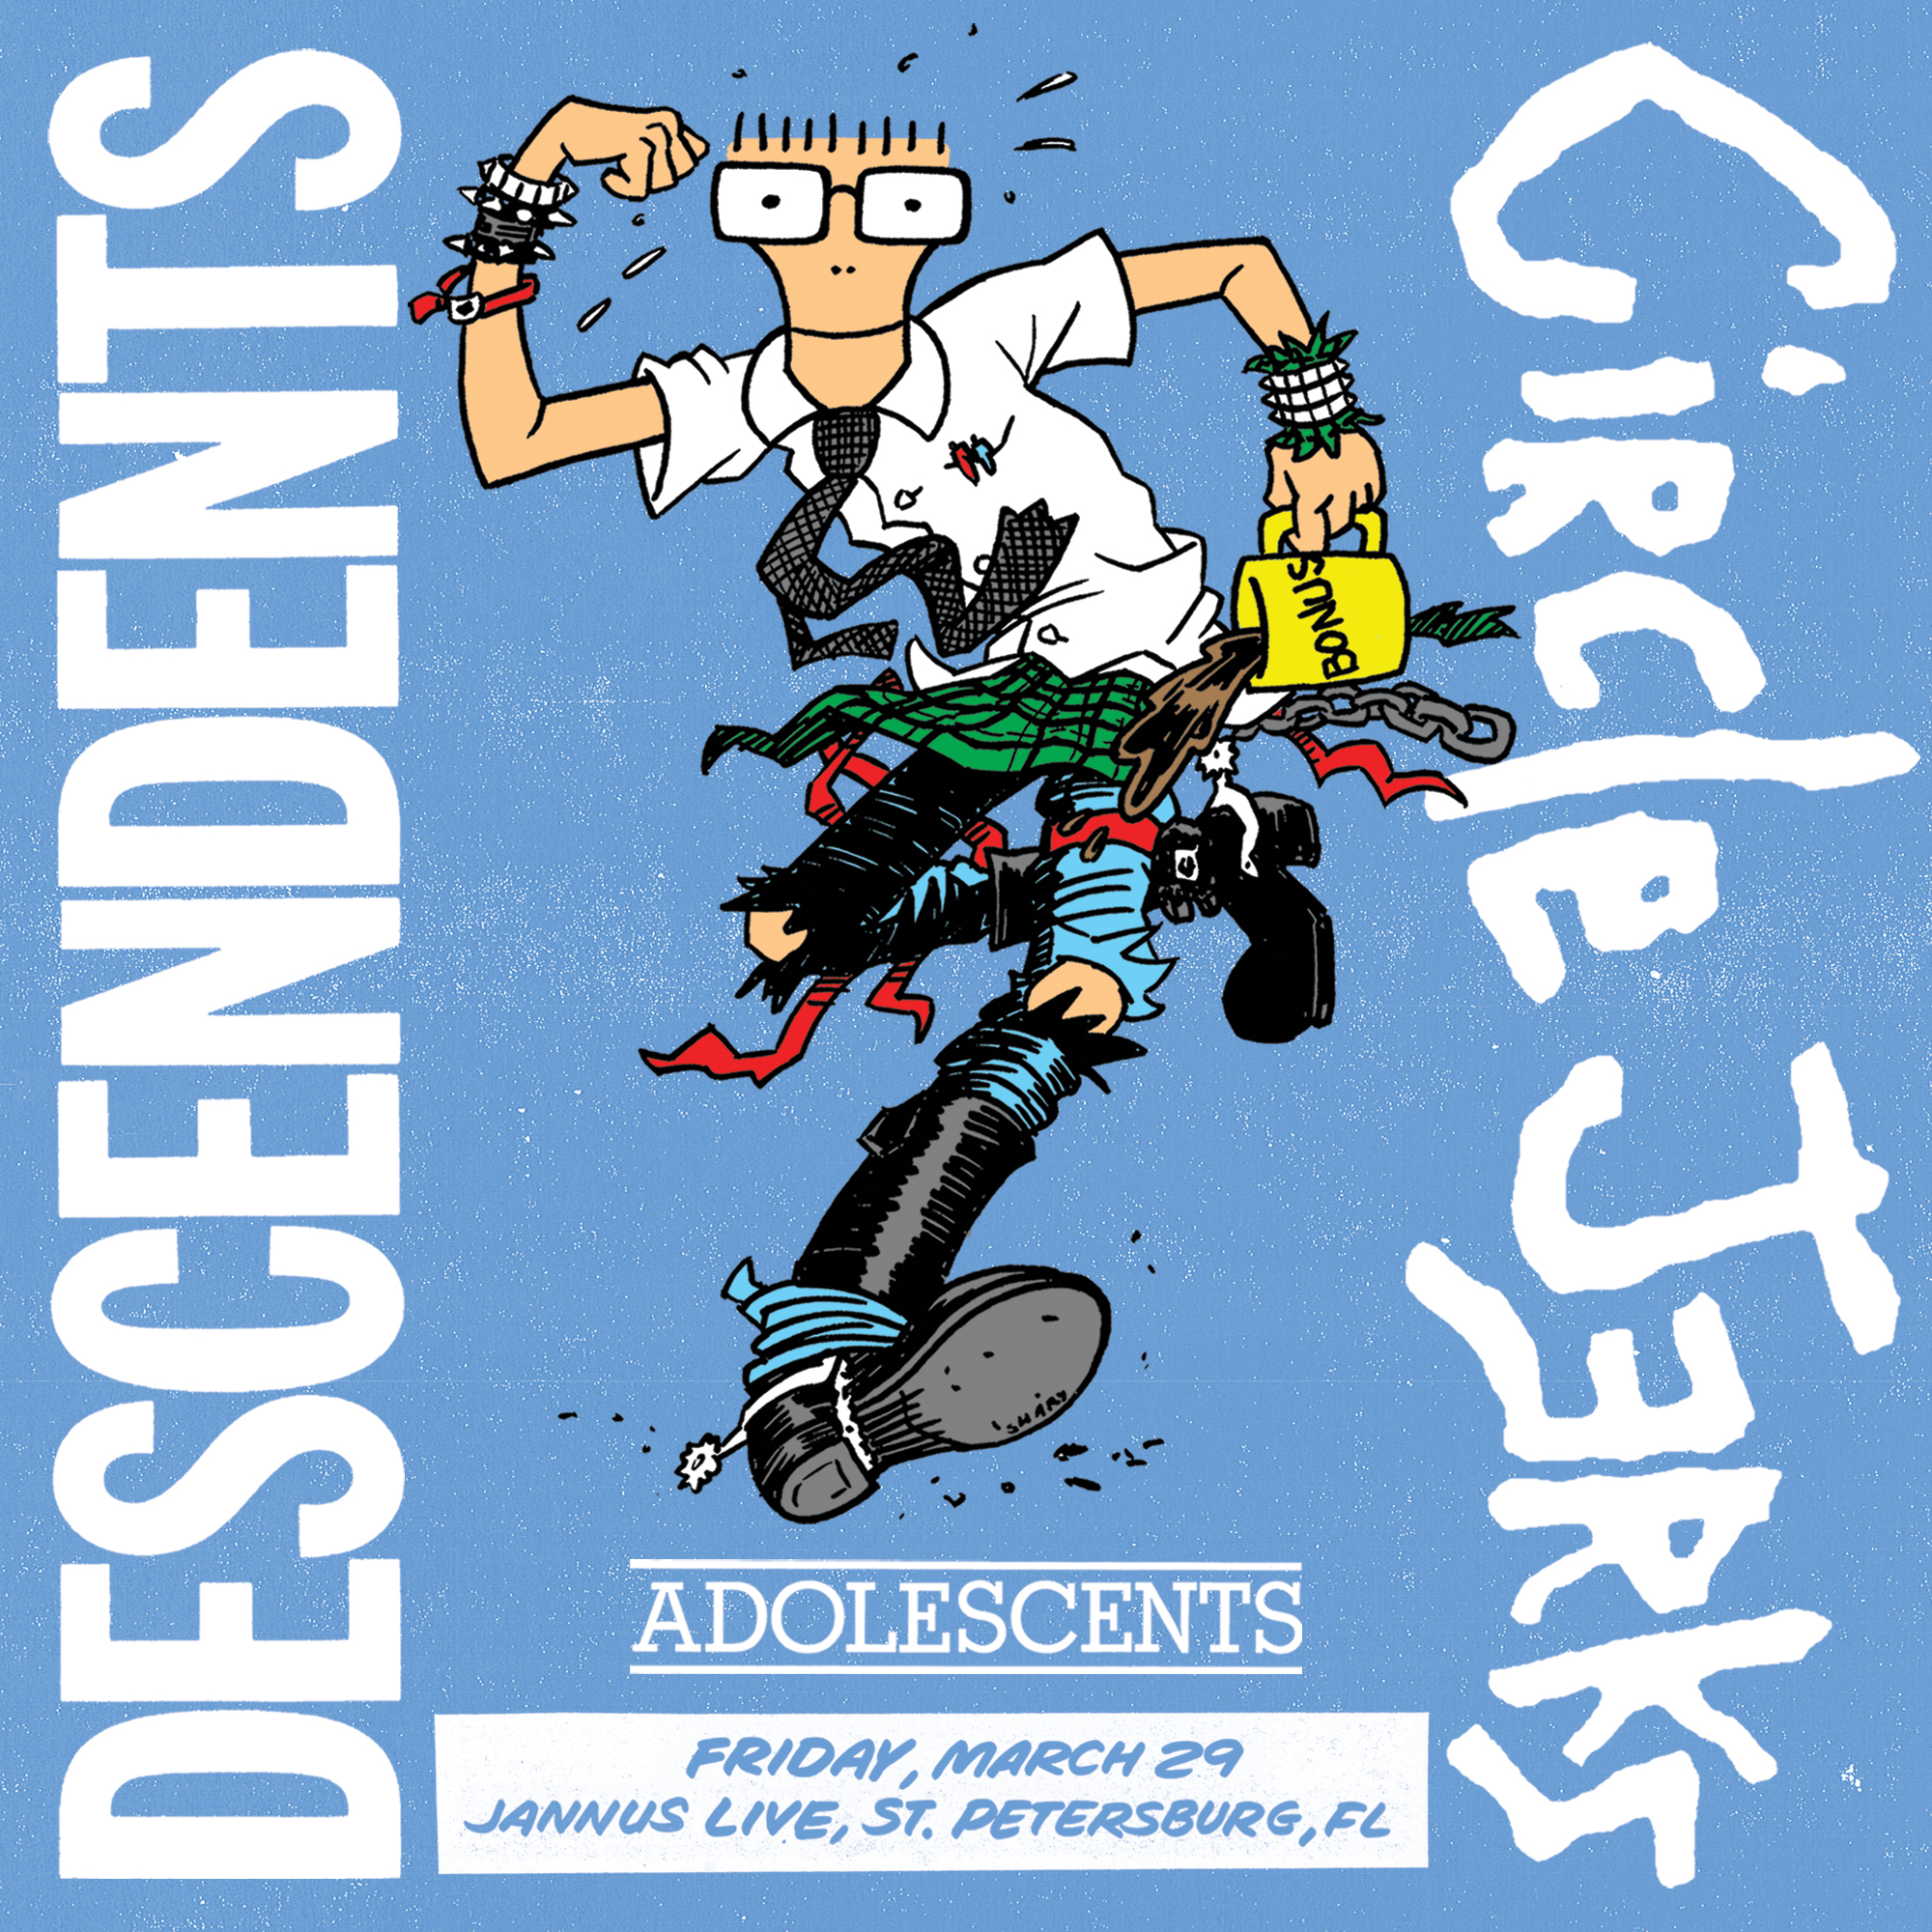 Descendents Circle Jerks Adolescents concert tickets band St Pete